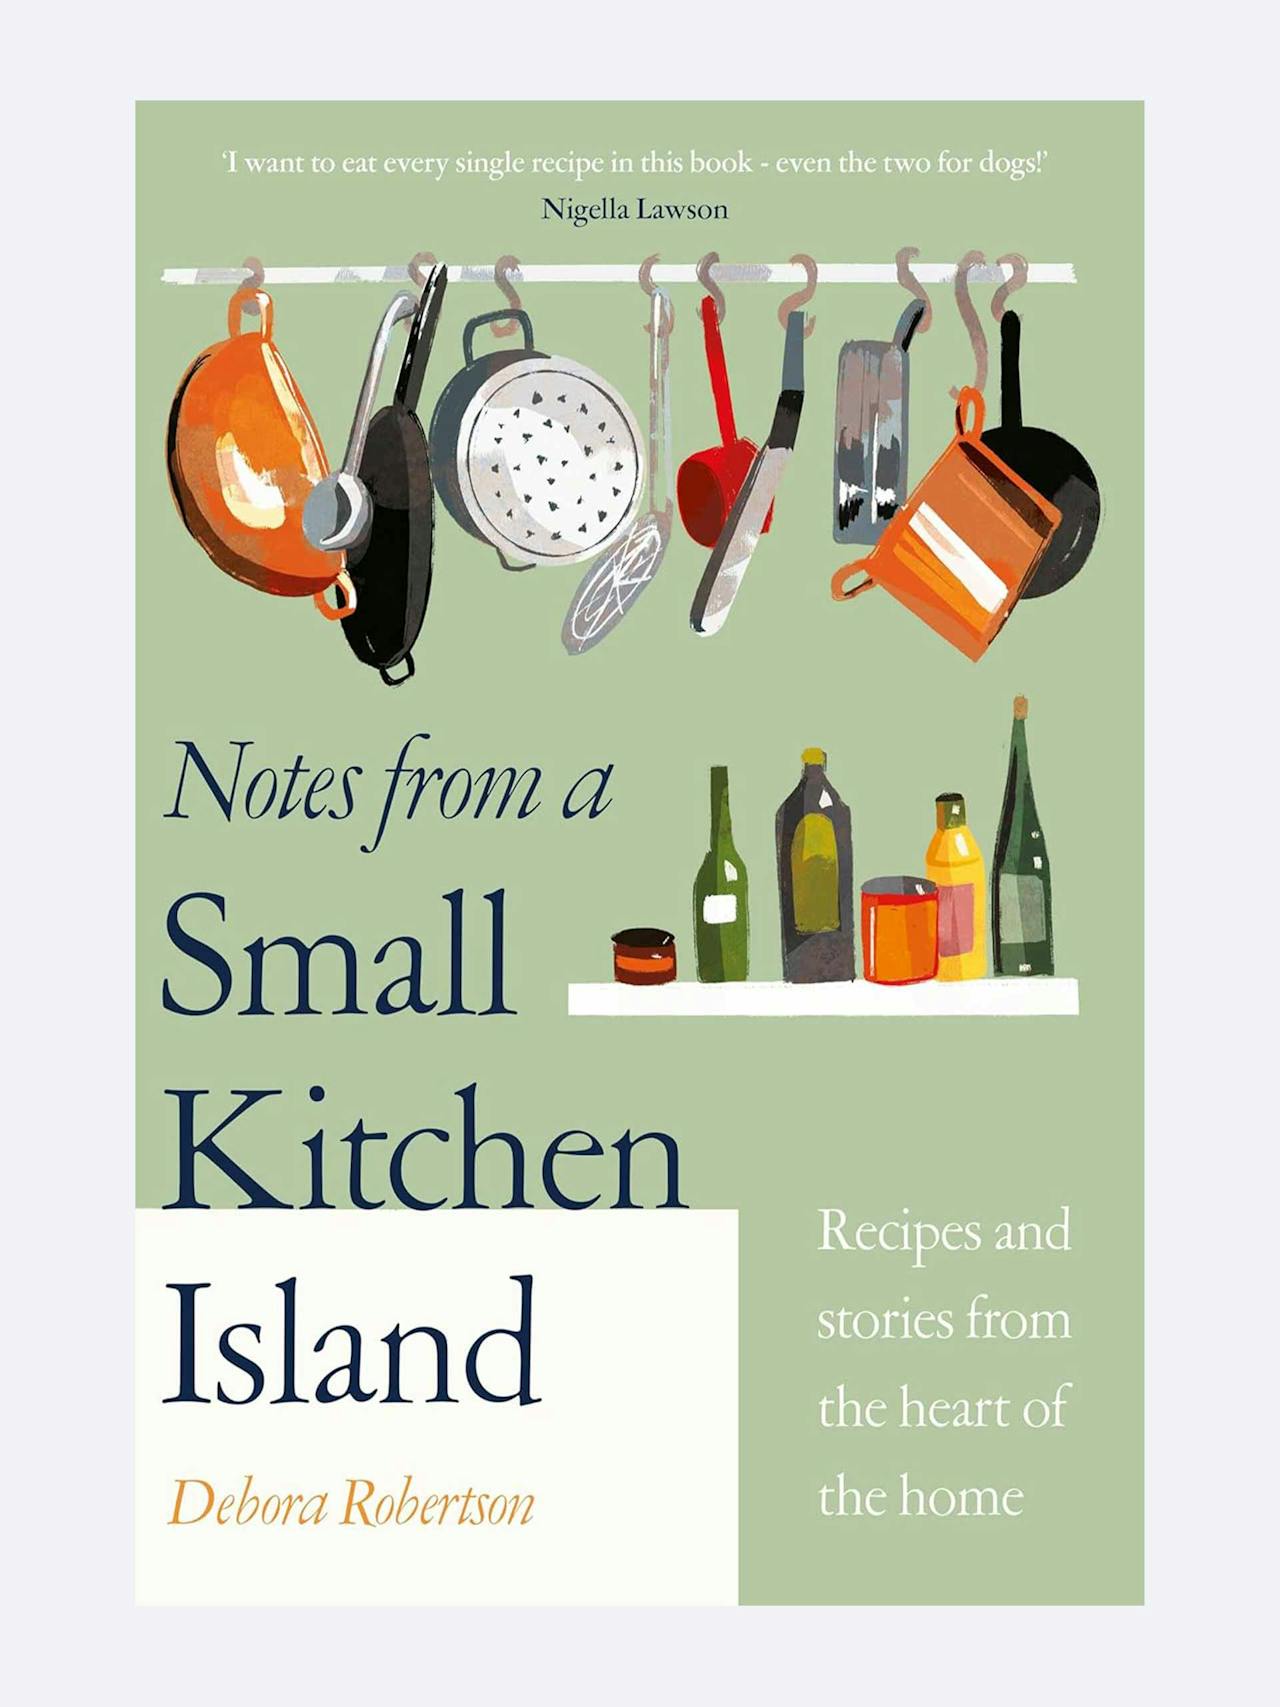 Notes from a Small Kitchen Island cookbook